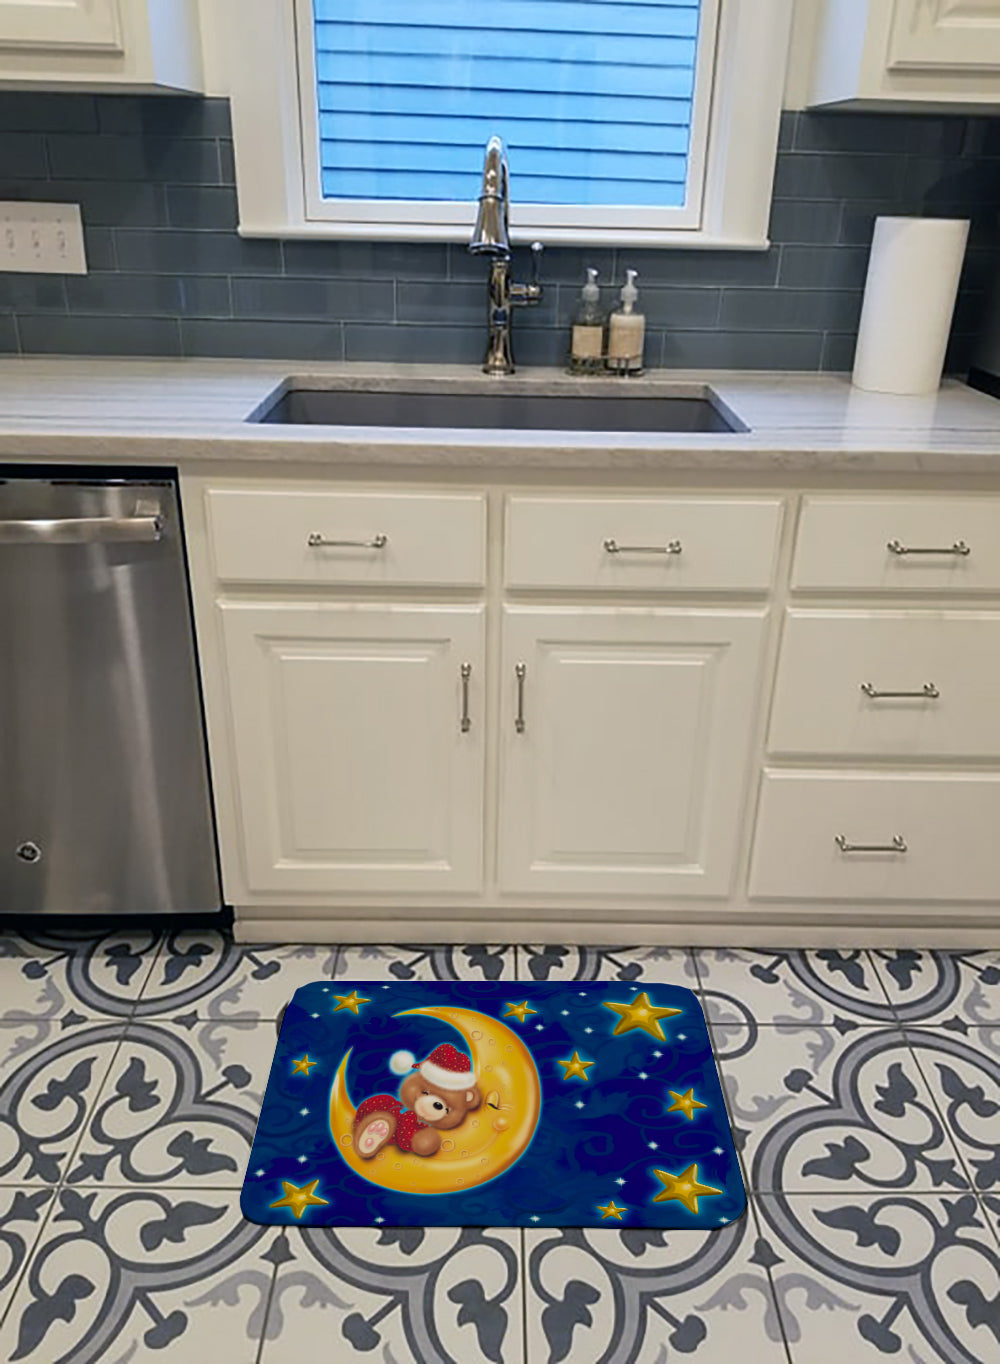 Bear Sleeping in the Moon and Stars Machine Washable Memory Foam Mat APH514BRUG - the-store.com